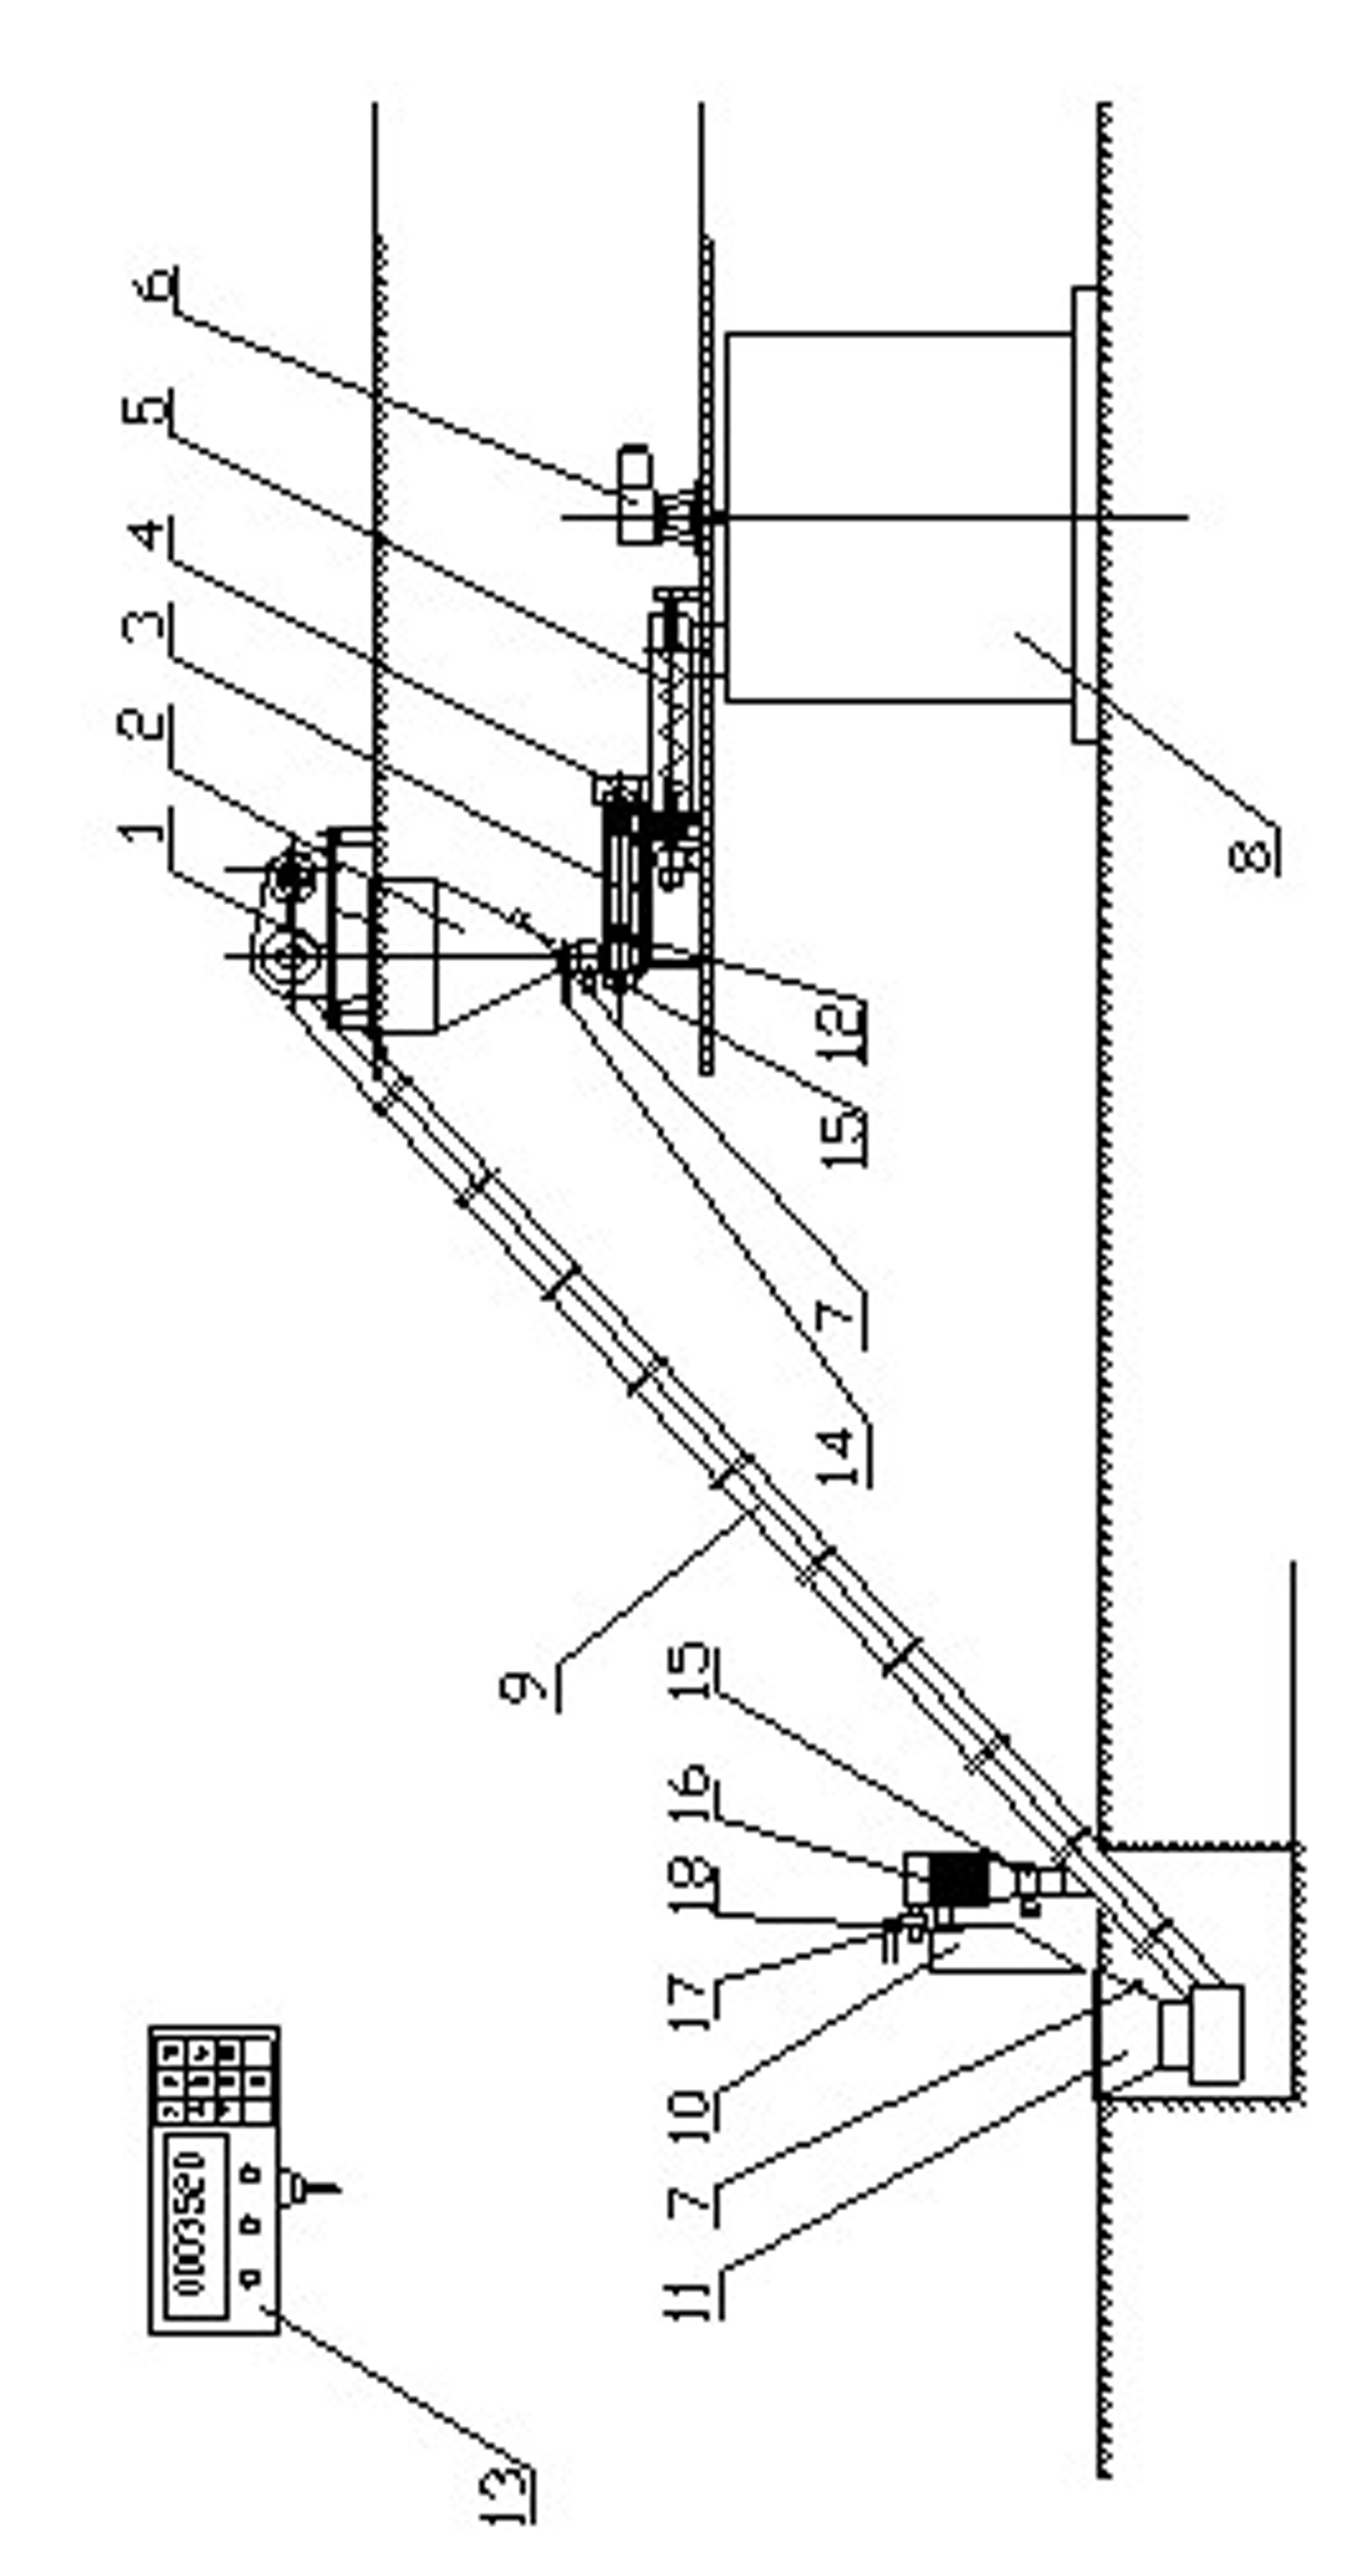 System for automatically charging a dry powder material